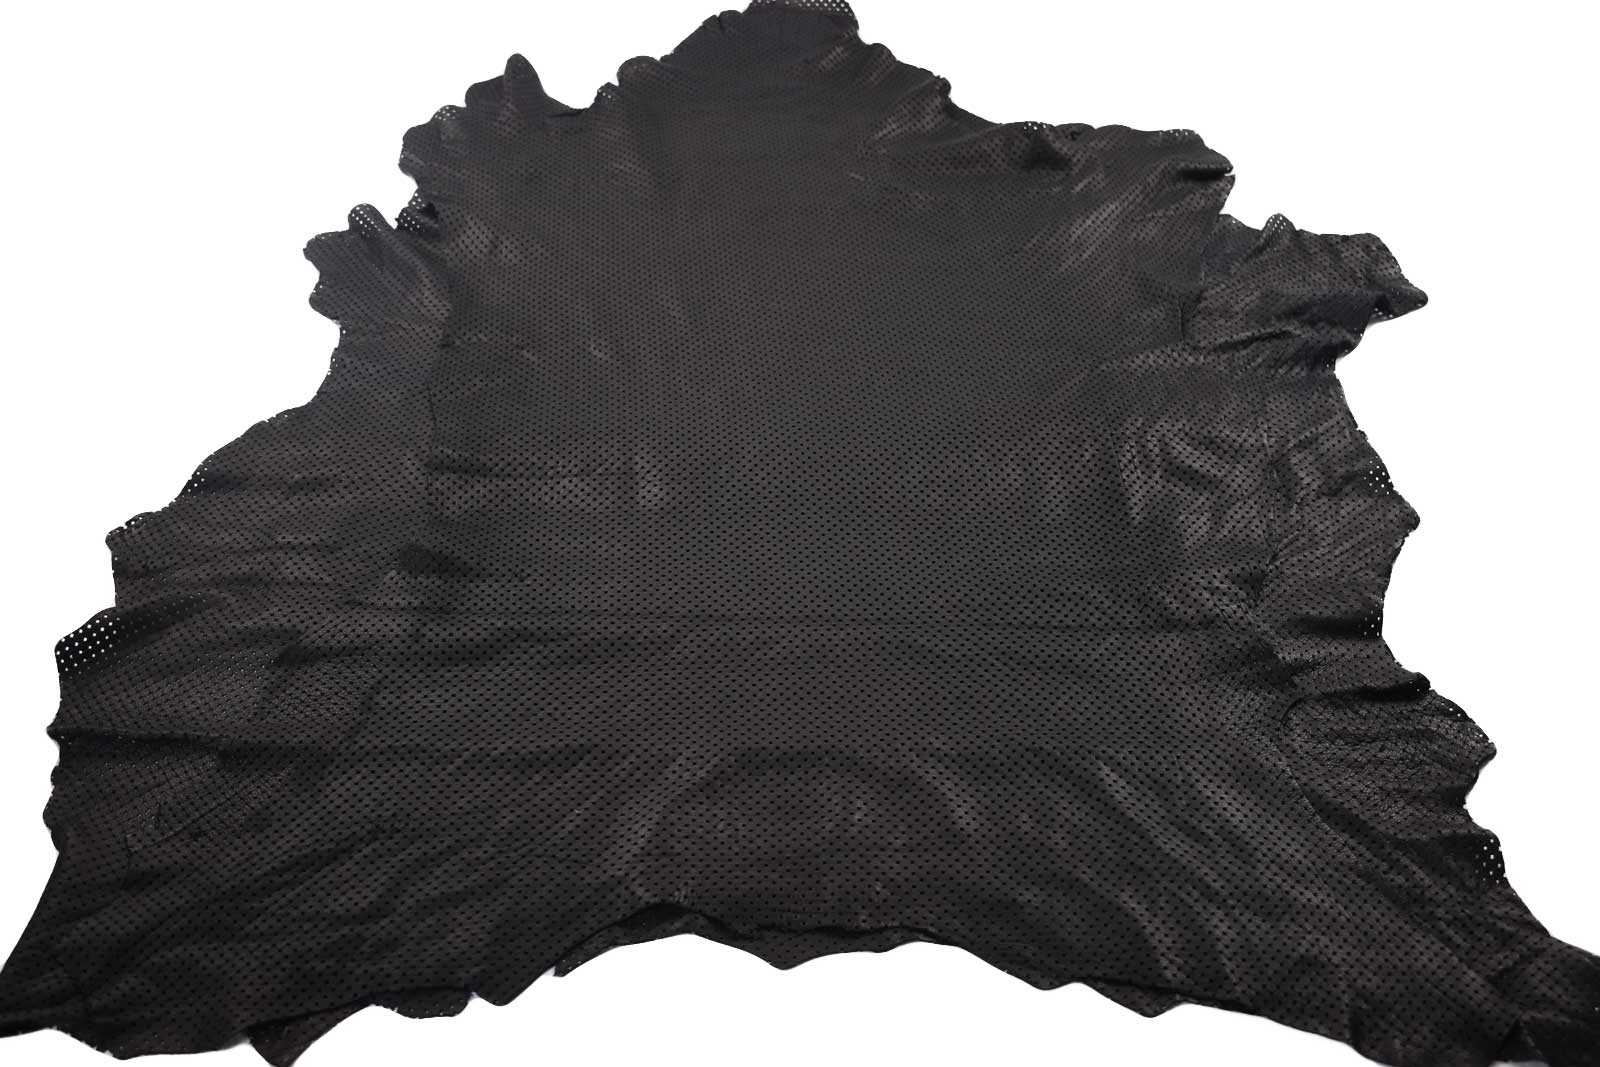 Soft black perforated sheepskin hides, 14 sq ft stock lot, ideal for couture fashion and crafting. Easy to cut and stitch with a sewing machine.